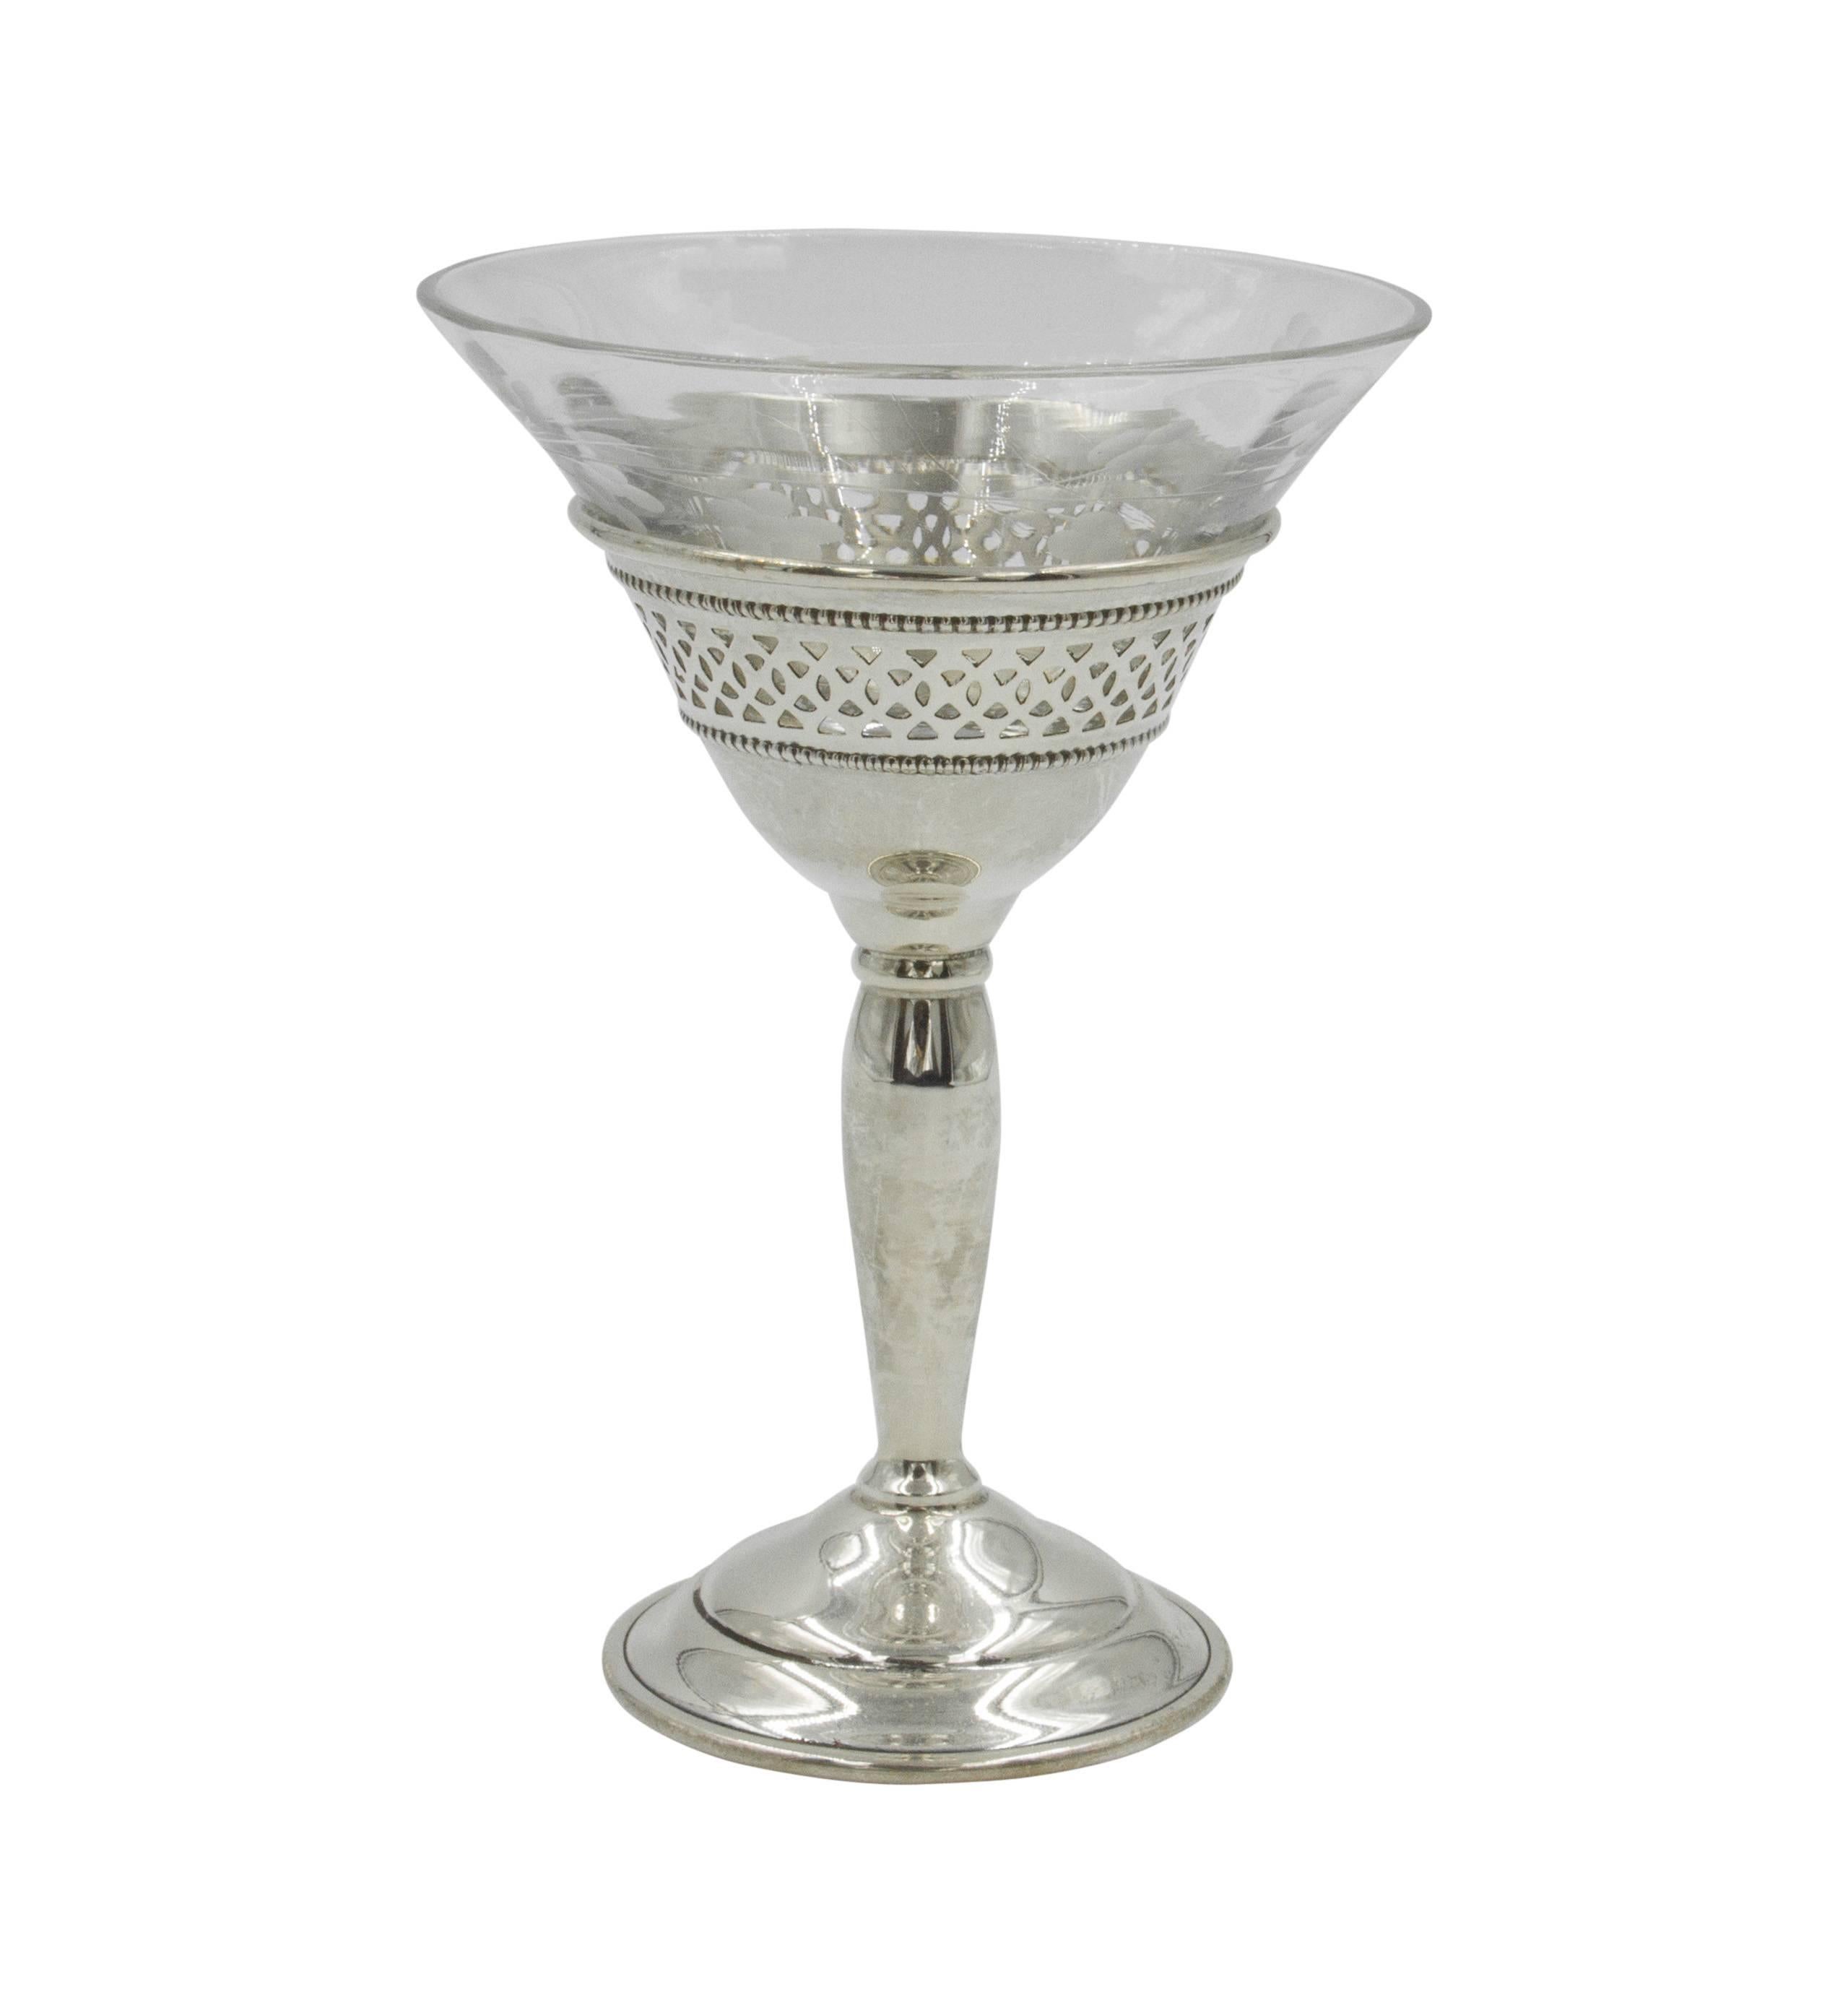 Proudly offering a set of 18 cordials made by Elgin Silversmiths. These lovely cups are meticulously made; the crystal screws into the sterling base. The glass cannot fall out. Delicately etched flowers go around the crystal. The sterling base is